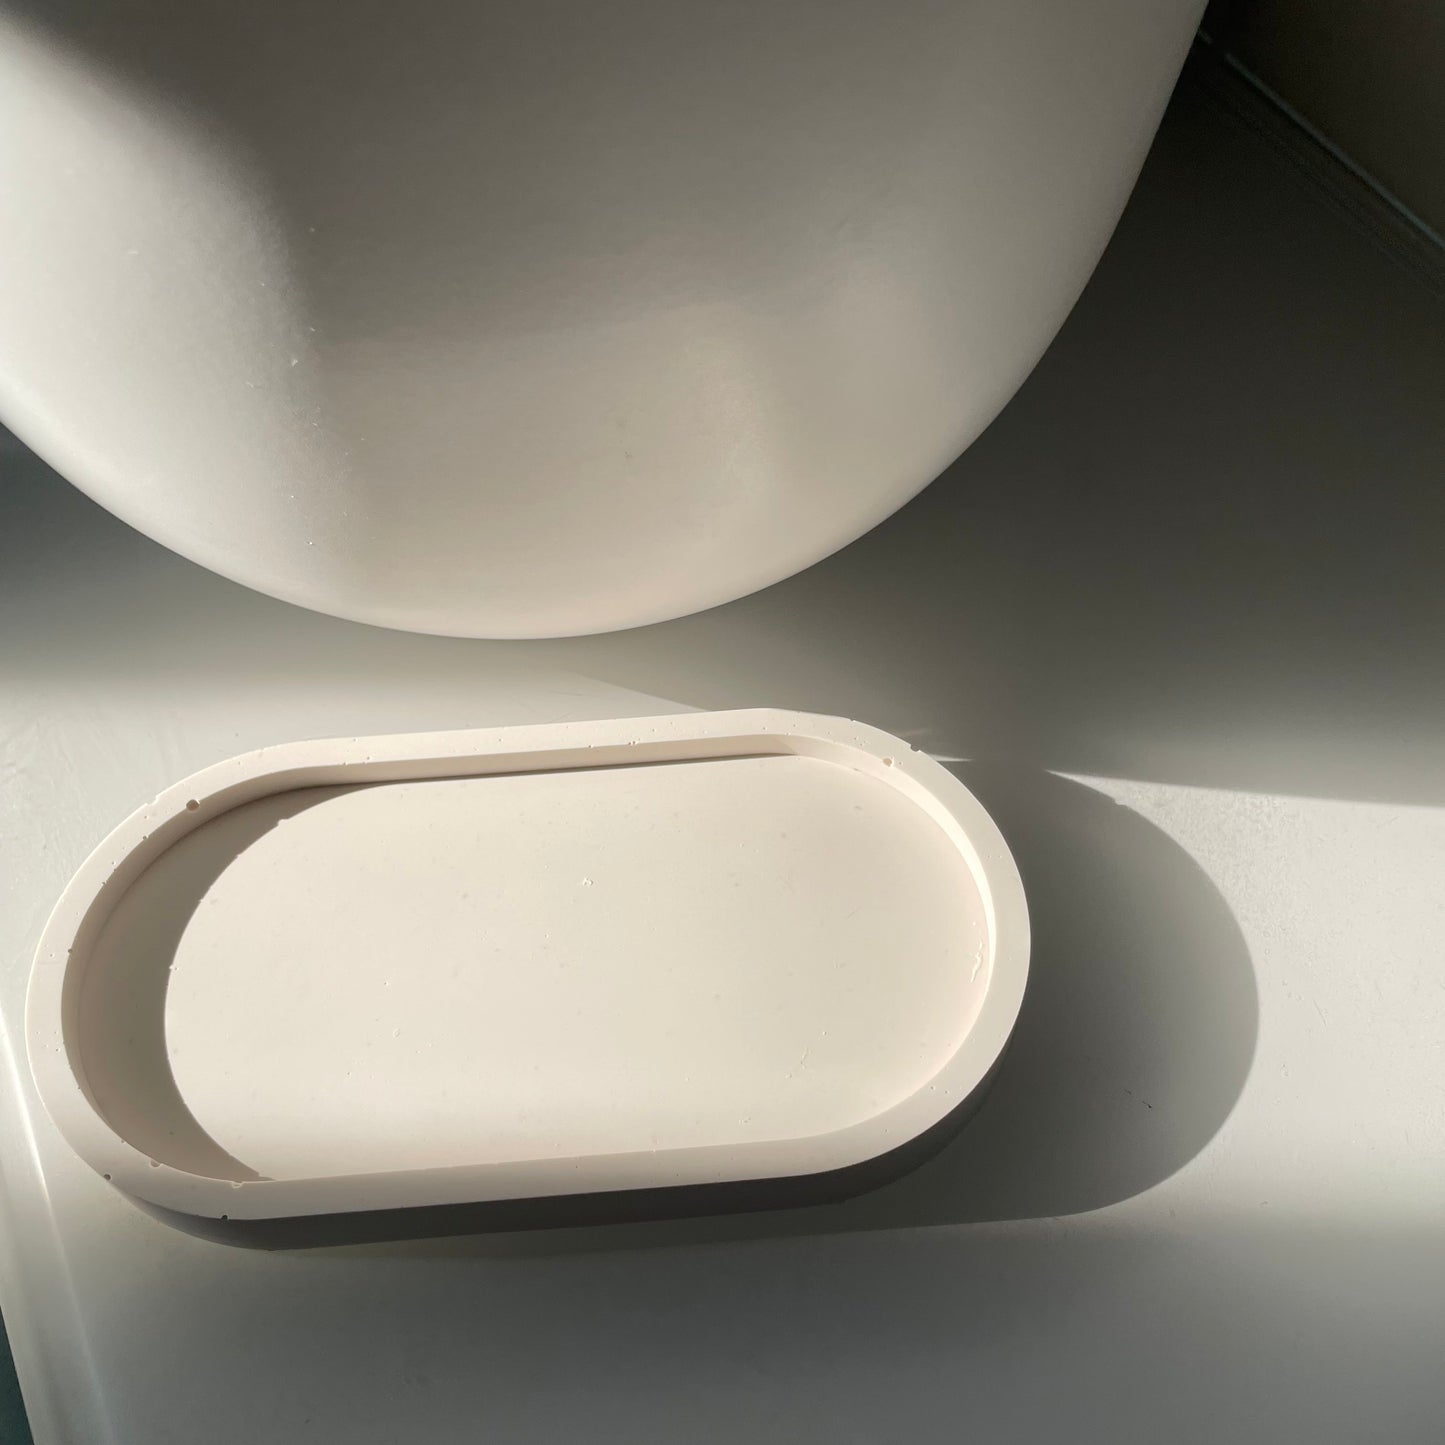 Picture of a modern and aesthetic white oval tray on a shelf.